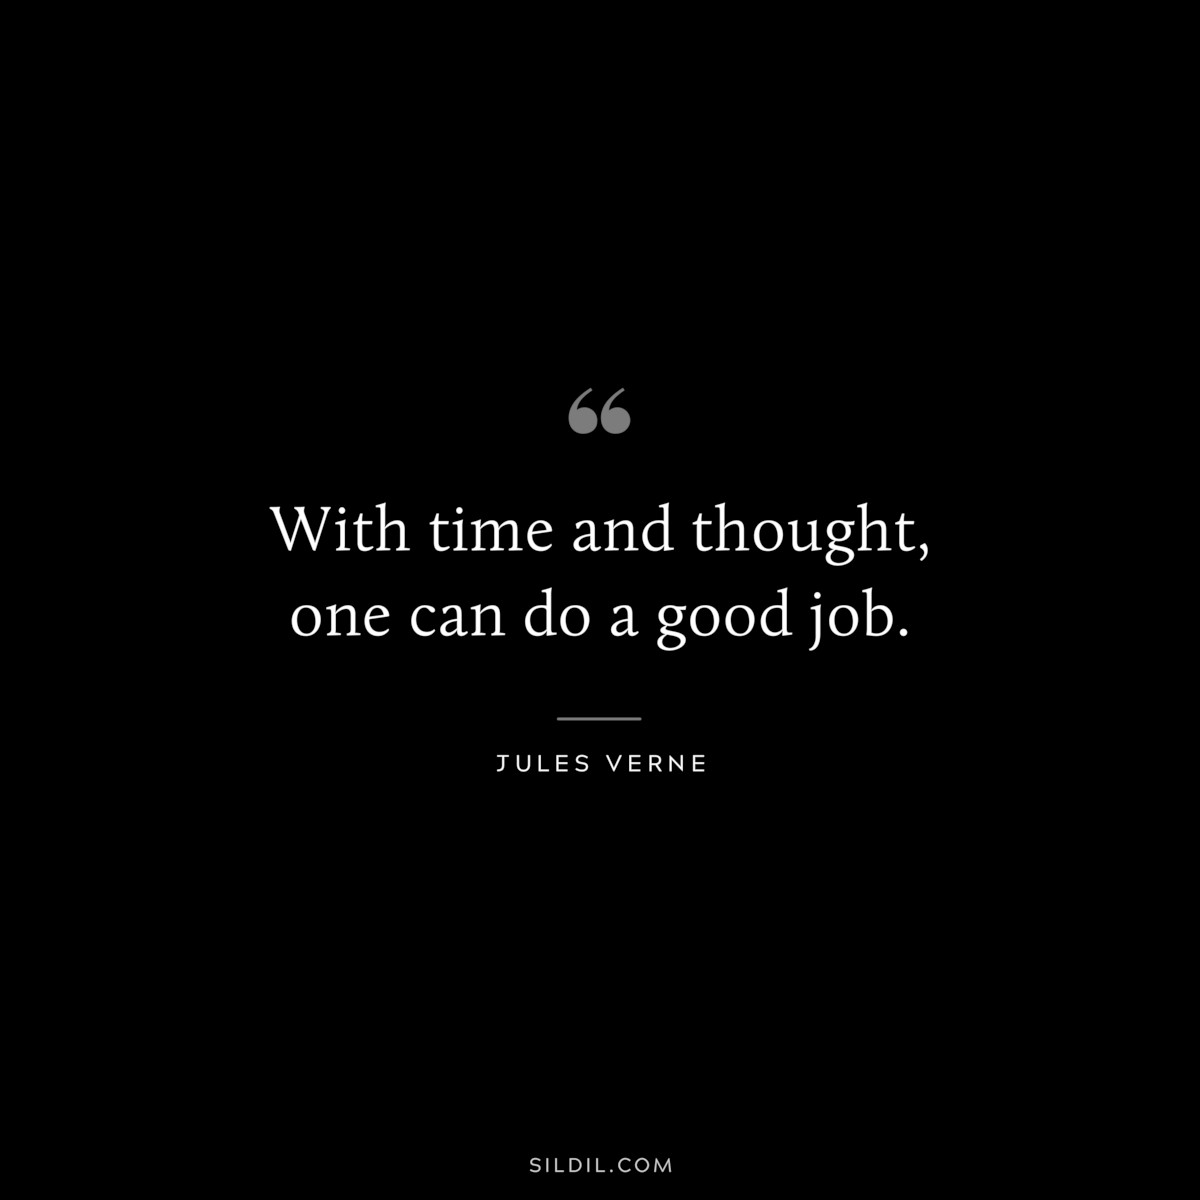 With time and thought, one can do a good job.